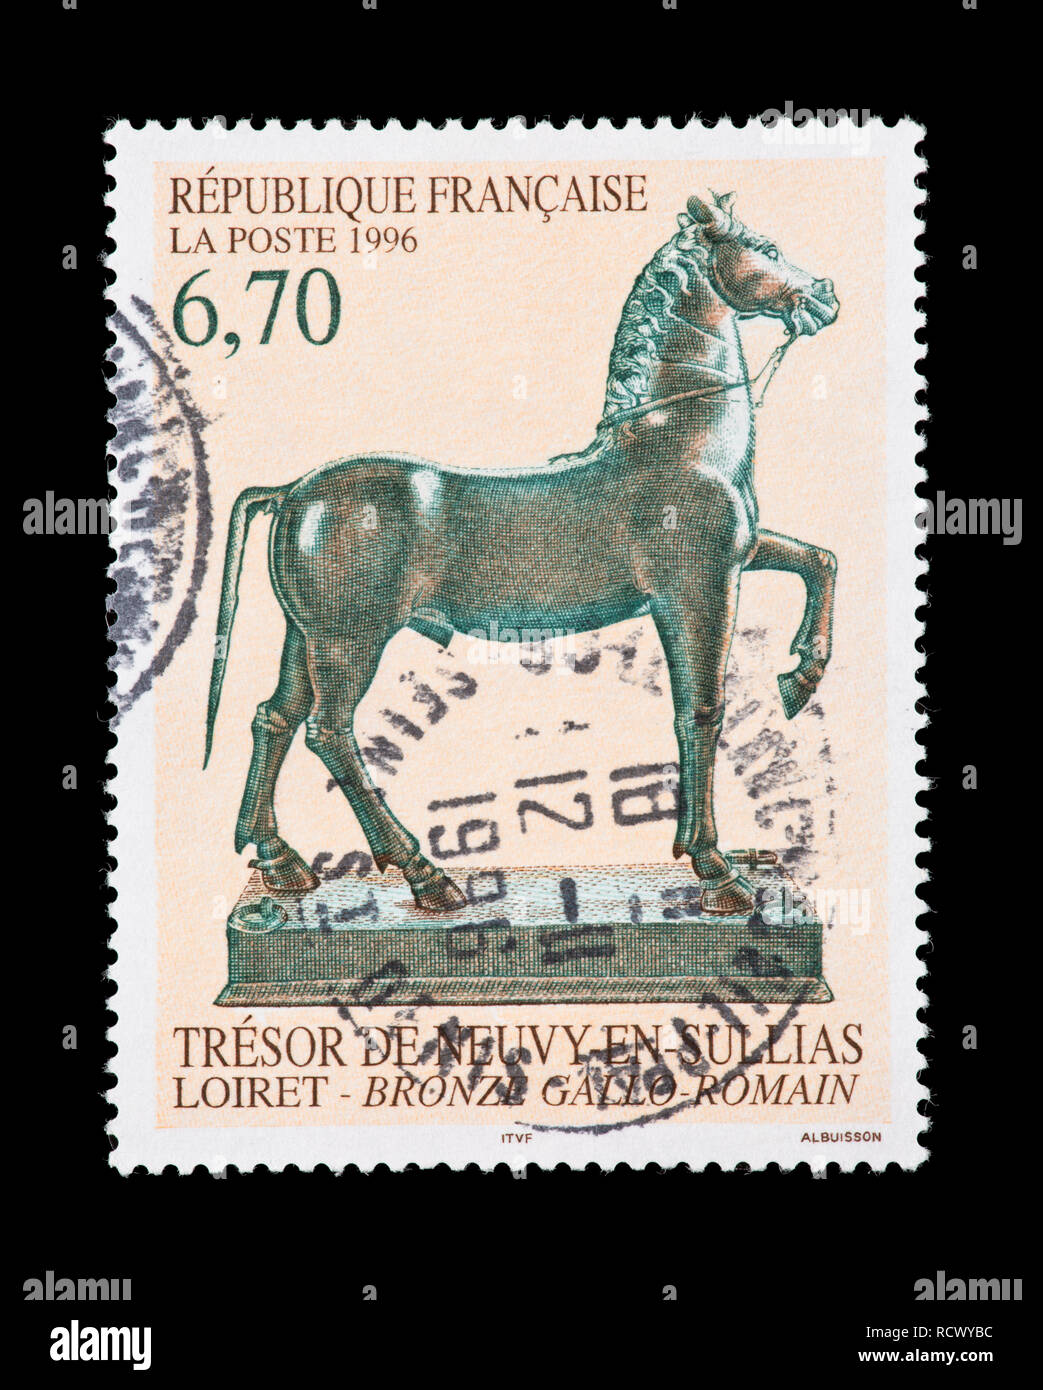 Postage stamp from France depicting a Gallo-Roman bronze statue of a horse from Neuvy-en-Sullias, Loiret Stock Photo